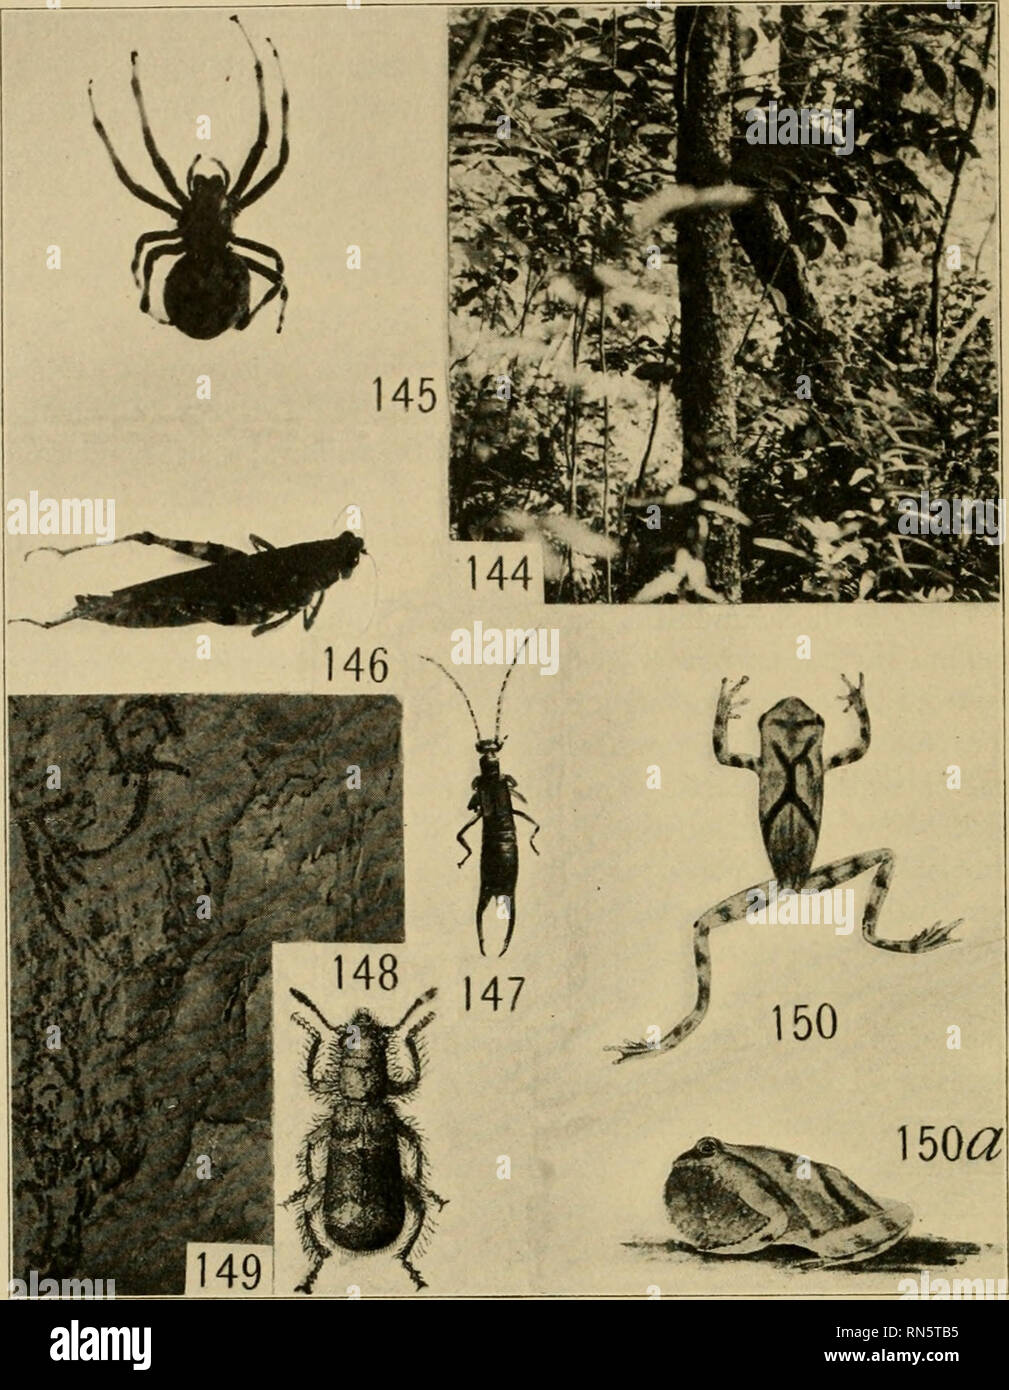 . Animal communities in temperate America, as illustrated in the Chicago region ; a study in animal ecology. Animal ecology; Zoology. 194 WET FOREST COMMUNITIES. Representatives of the Tamarack Sw.uip Community Fig. 144.—View in the den^e vegetation of the tamarack swamp. Fig. 145.—Female orb-weaver {Epeira gigas); about natural size. Fig. 146.—^The brindled locust {Melanoplns pundiilatus); natural size. Fig. 147.—An esxmg {Apterygida aculeata); natural size. Fig. 148.—An engraver beetle destroyer {Cleridae, Thanasimus duhius); 3 times natural size (from Blatchley after Wolcott). Fig. 149.—The Stock Photo